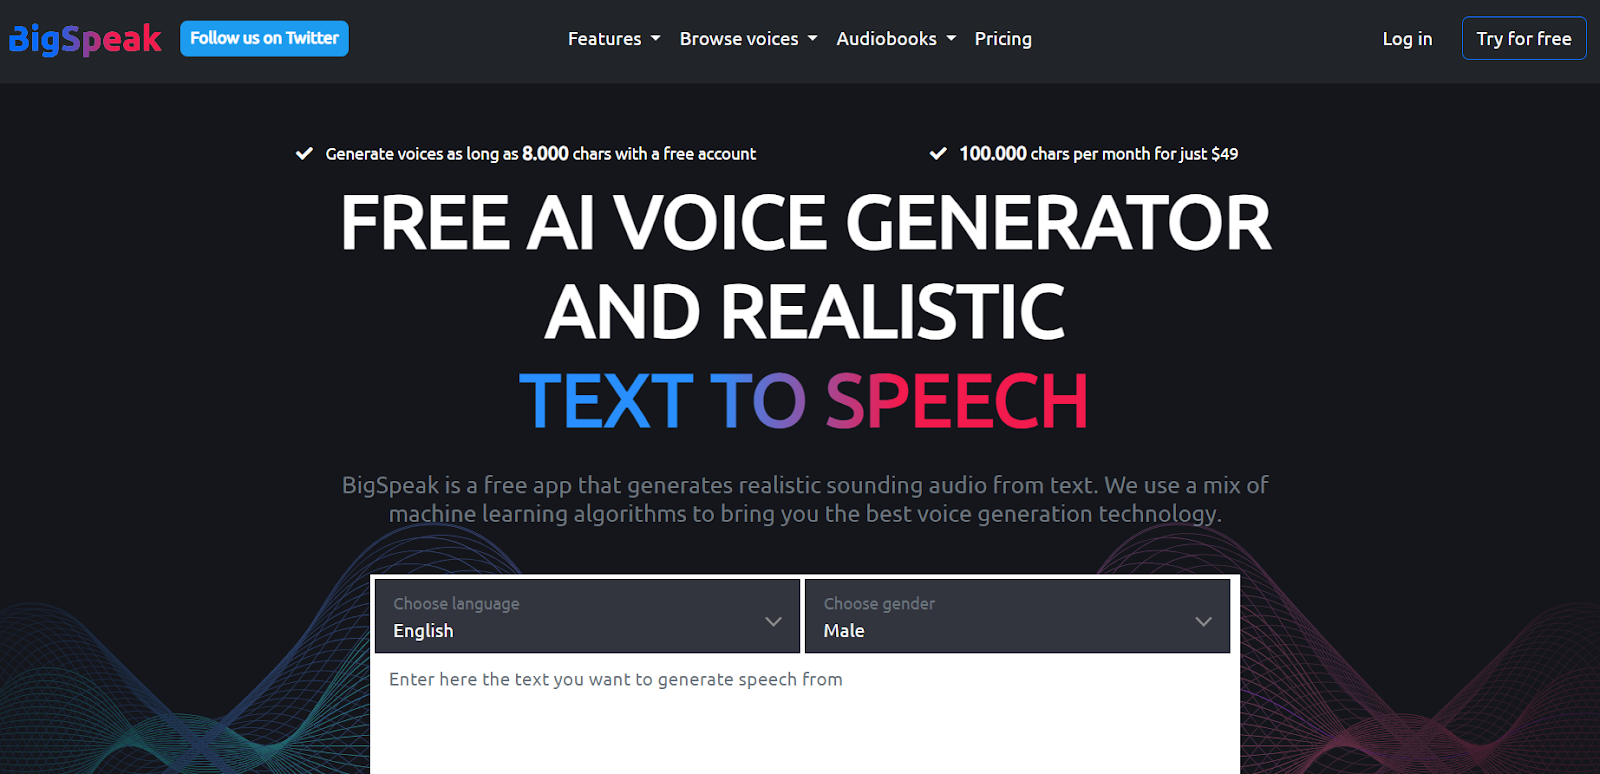 BigSpeak AI: Overview and Features